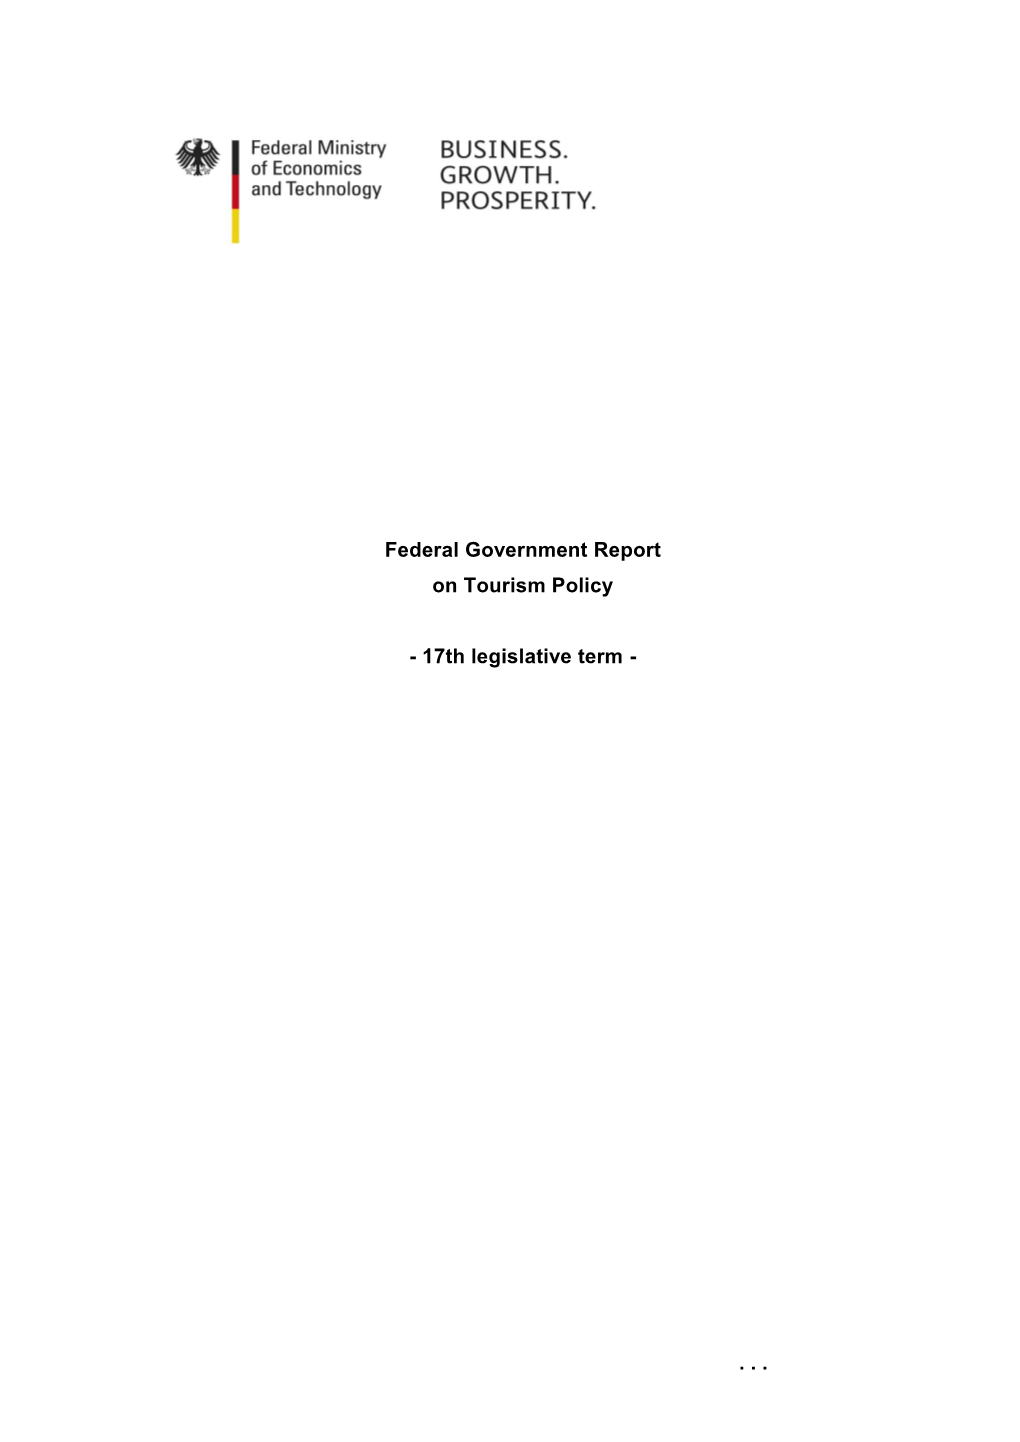 Federal Government Report on Tourism Policy